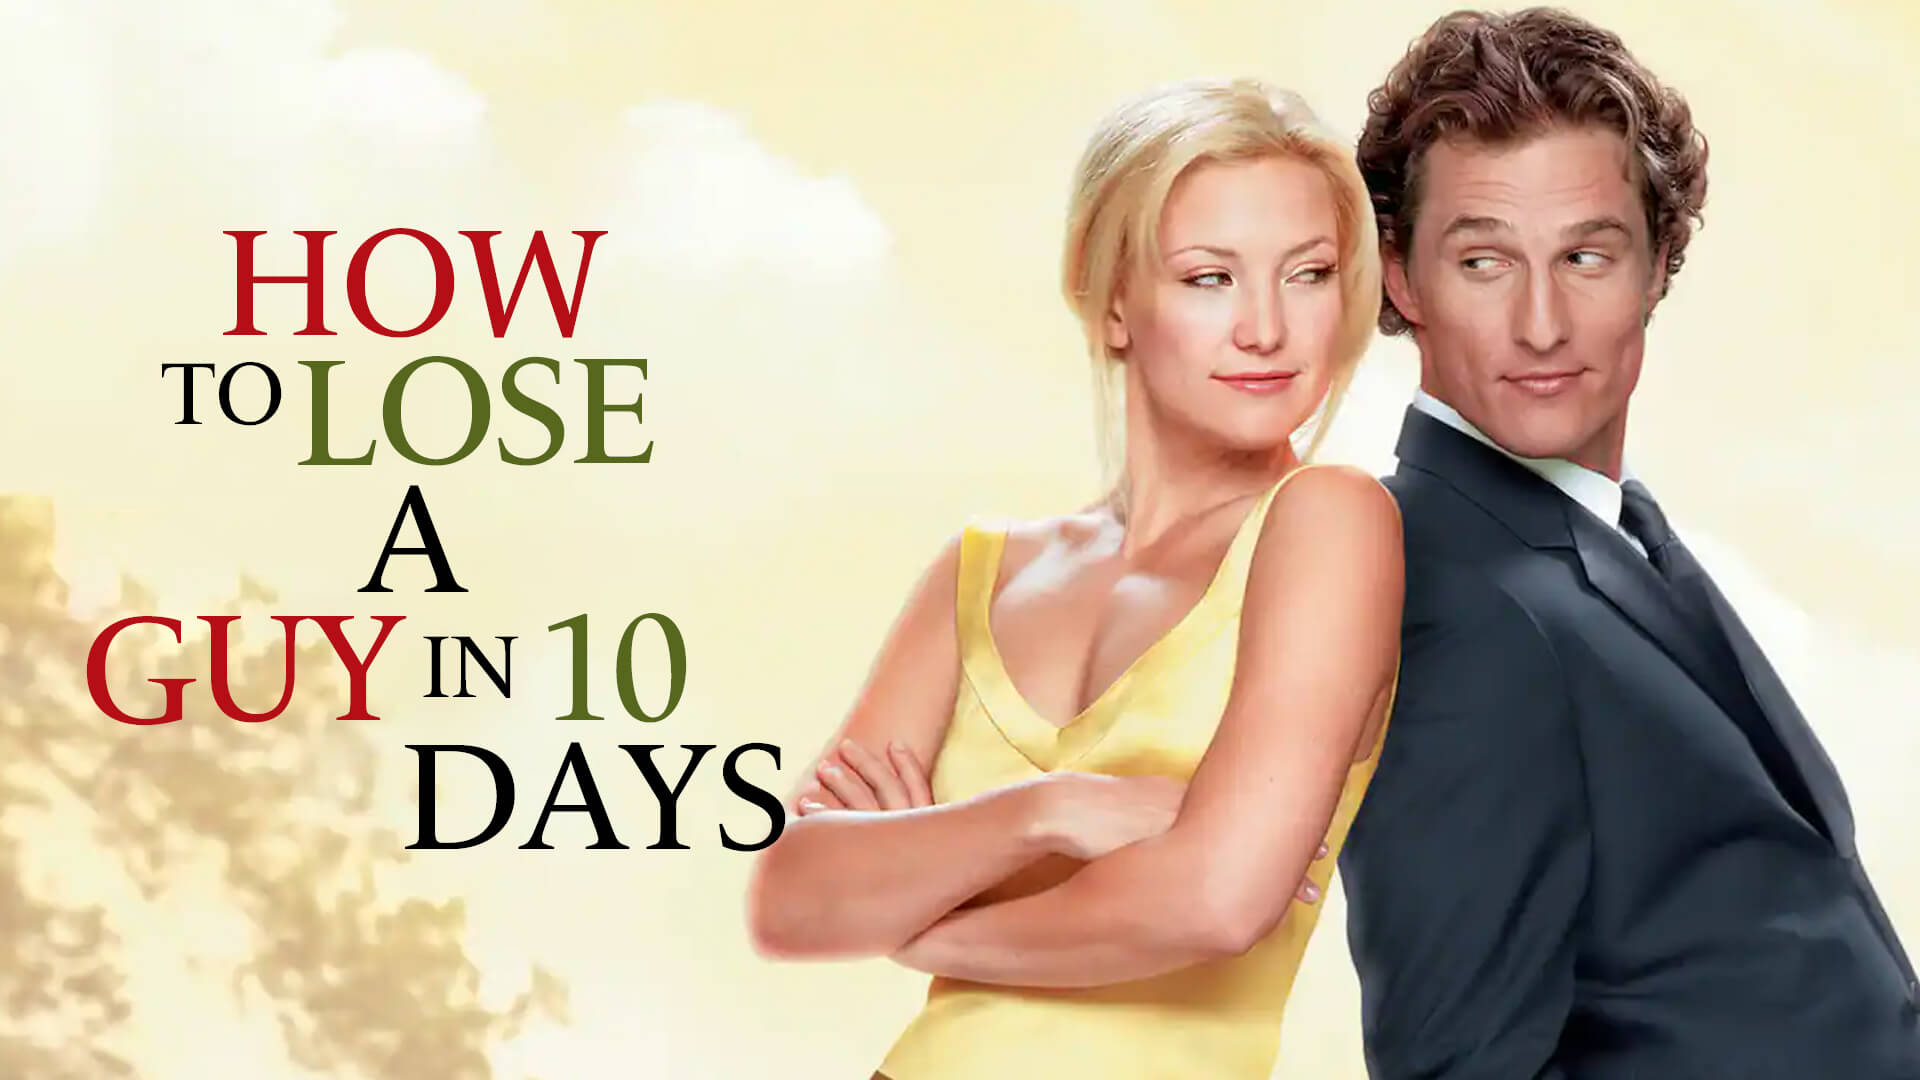 How-to-Lose-a-Guy-in-10-Days-in-France-best-movie